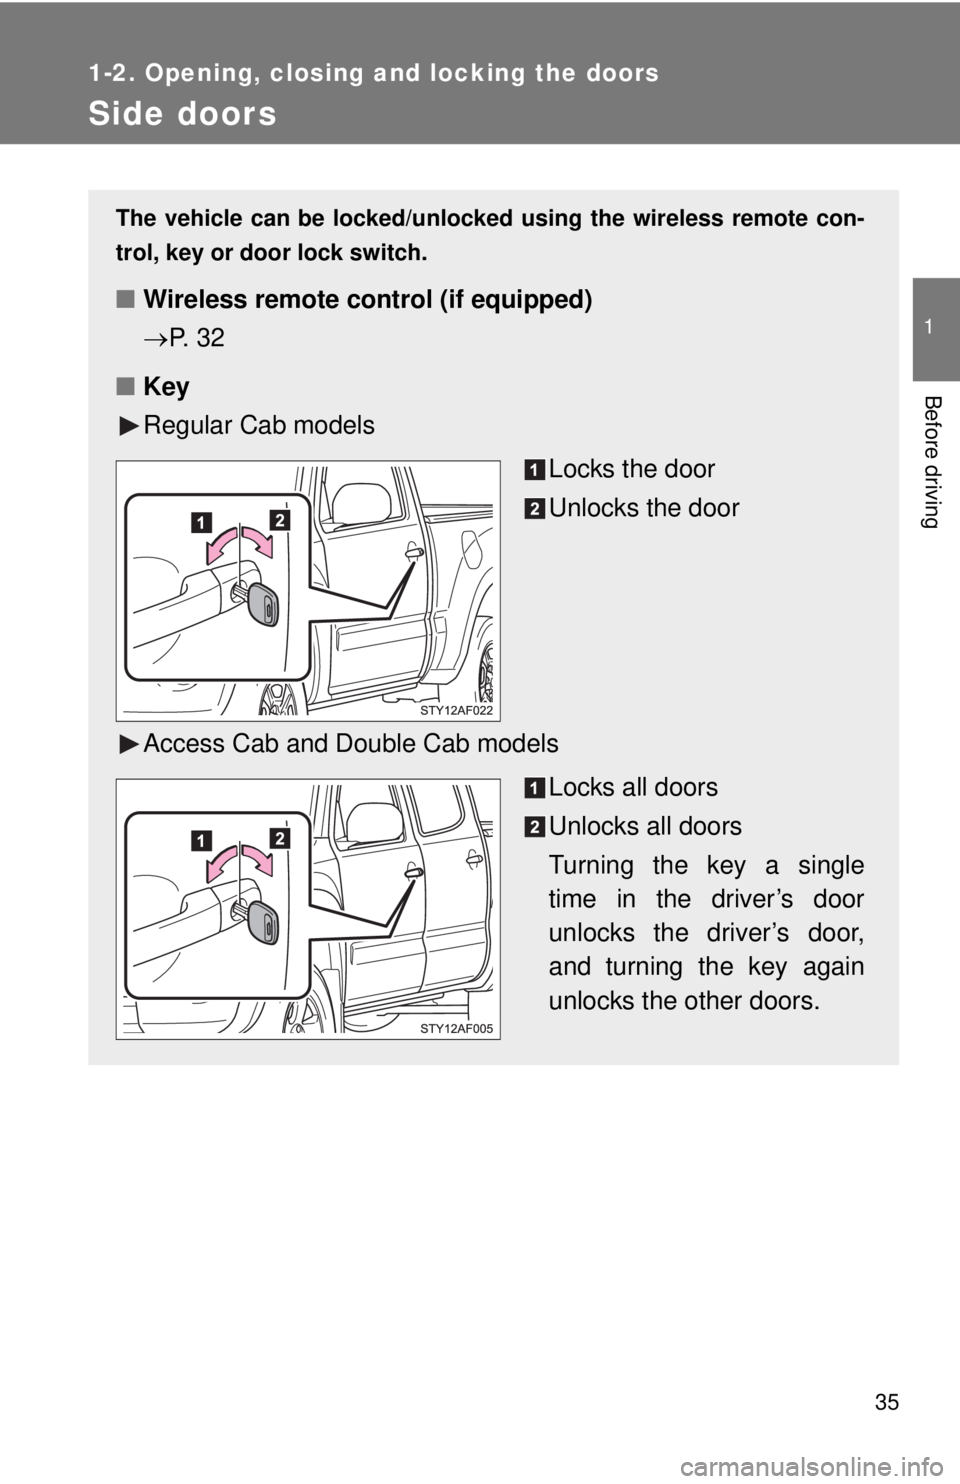 TOYOTA TACOMA 2011  Owners Manual (in English) 35
1
1-2. Opening, closing and locking the doors
Before driving
Side doors
The vehicle can be locked/unlocked using the wireless remote con-
trol, key or door lock switch.
■ Wireless remote control 